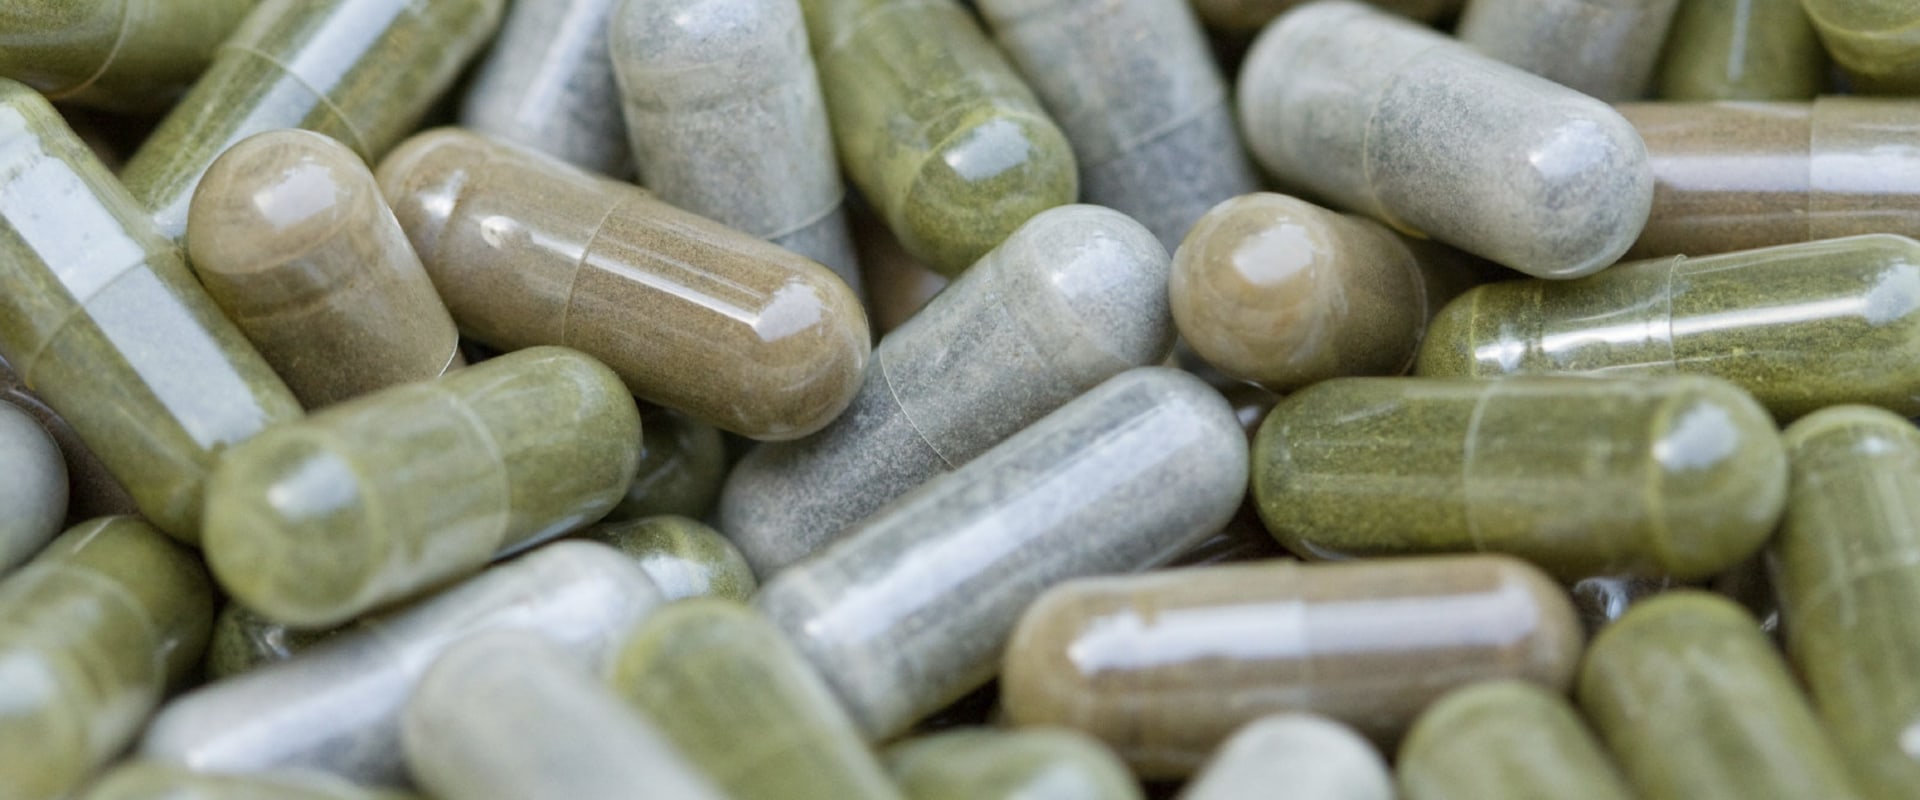 Understanding the Health Benefits and Risks of Dietary Supplements